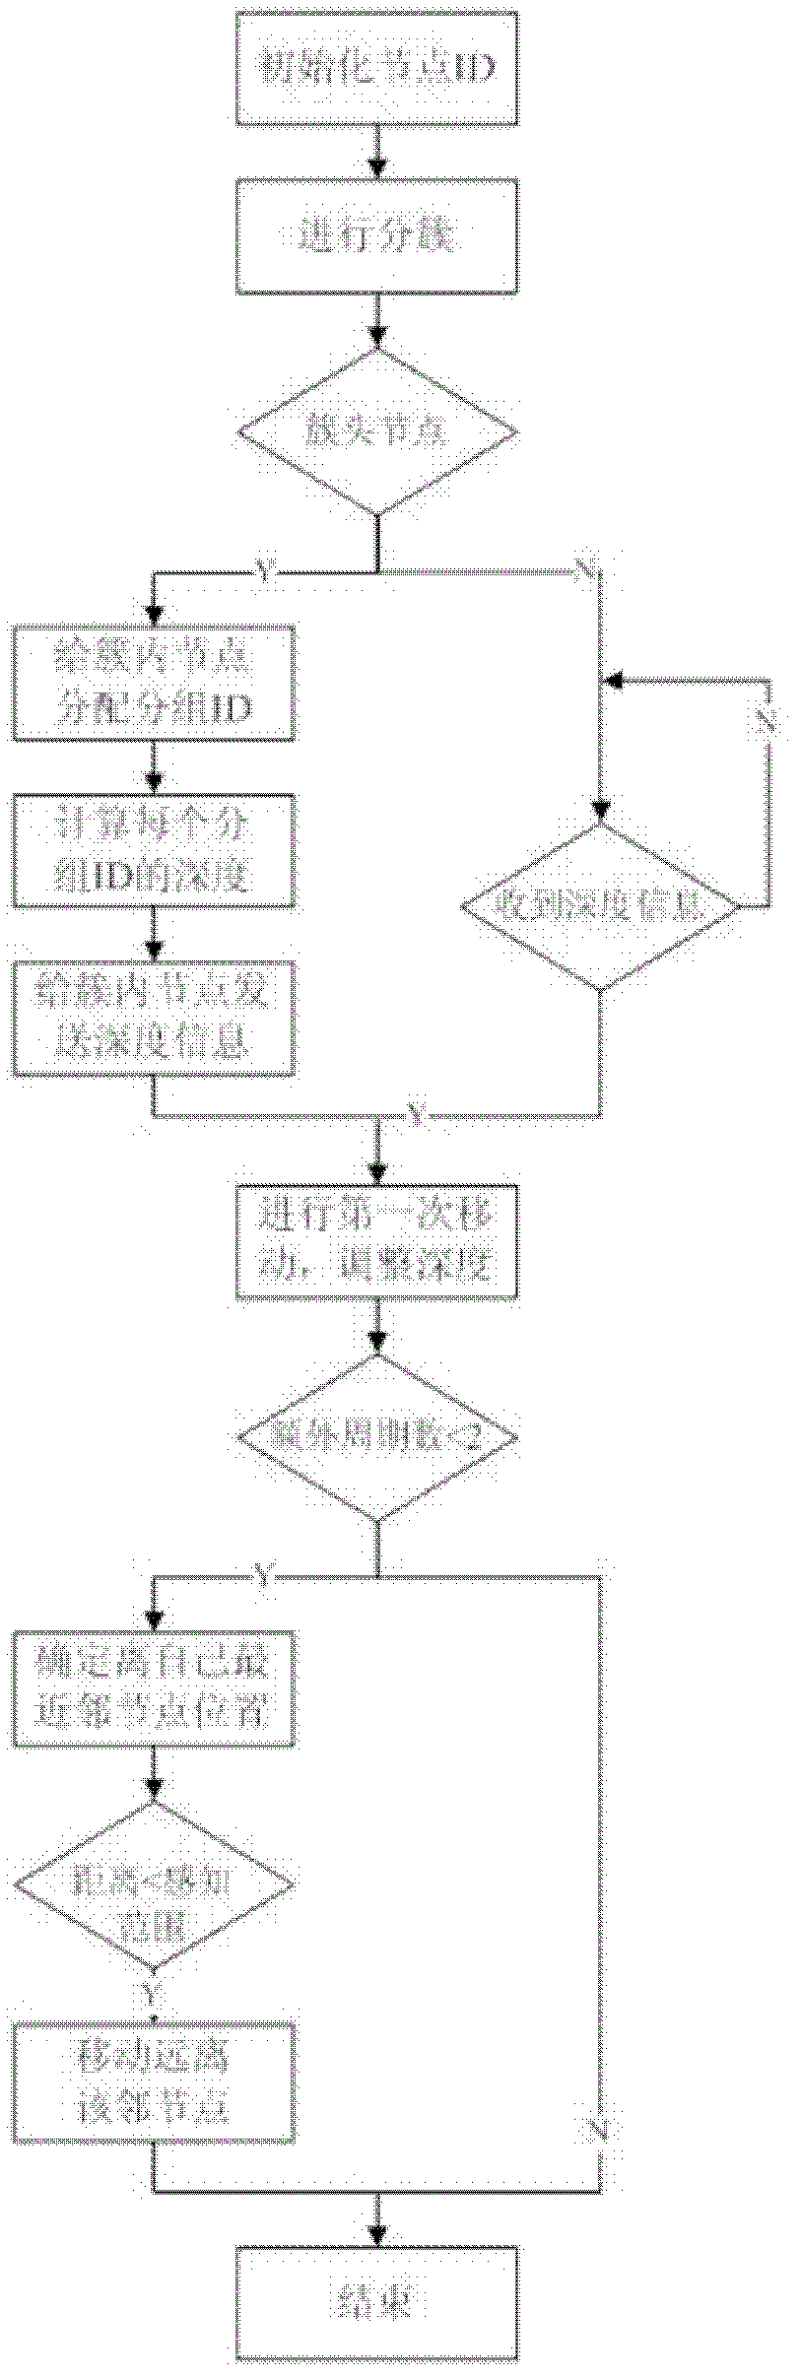 Distributed routing protocol method for three-dimensional underwater acoustic sensor networks